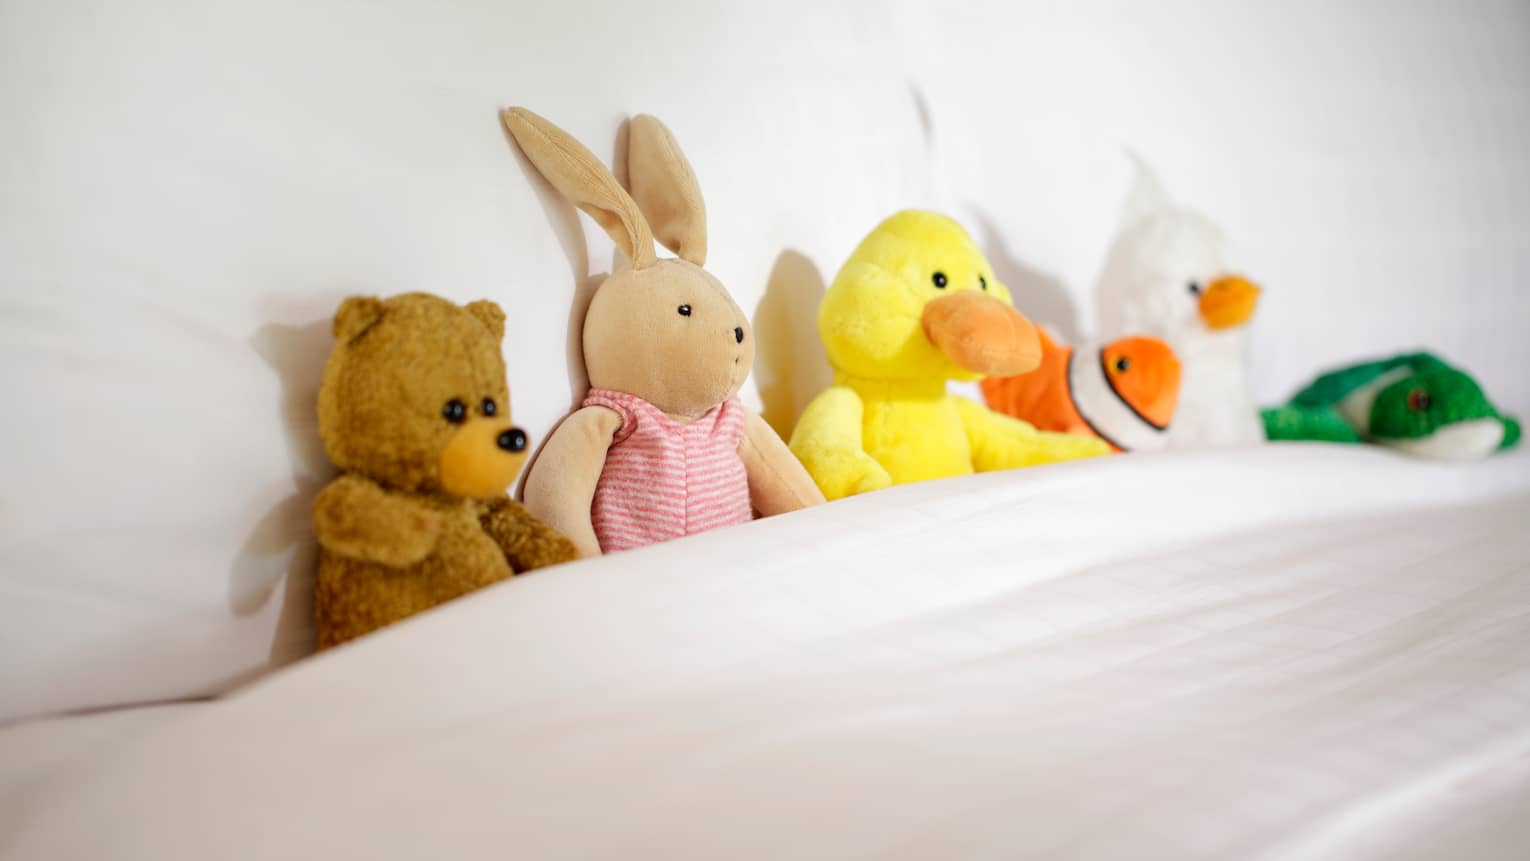 Stuffed bear, bunny and ducks tucked into hotel bed blanket against pillow